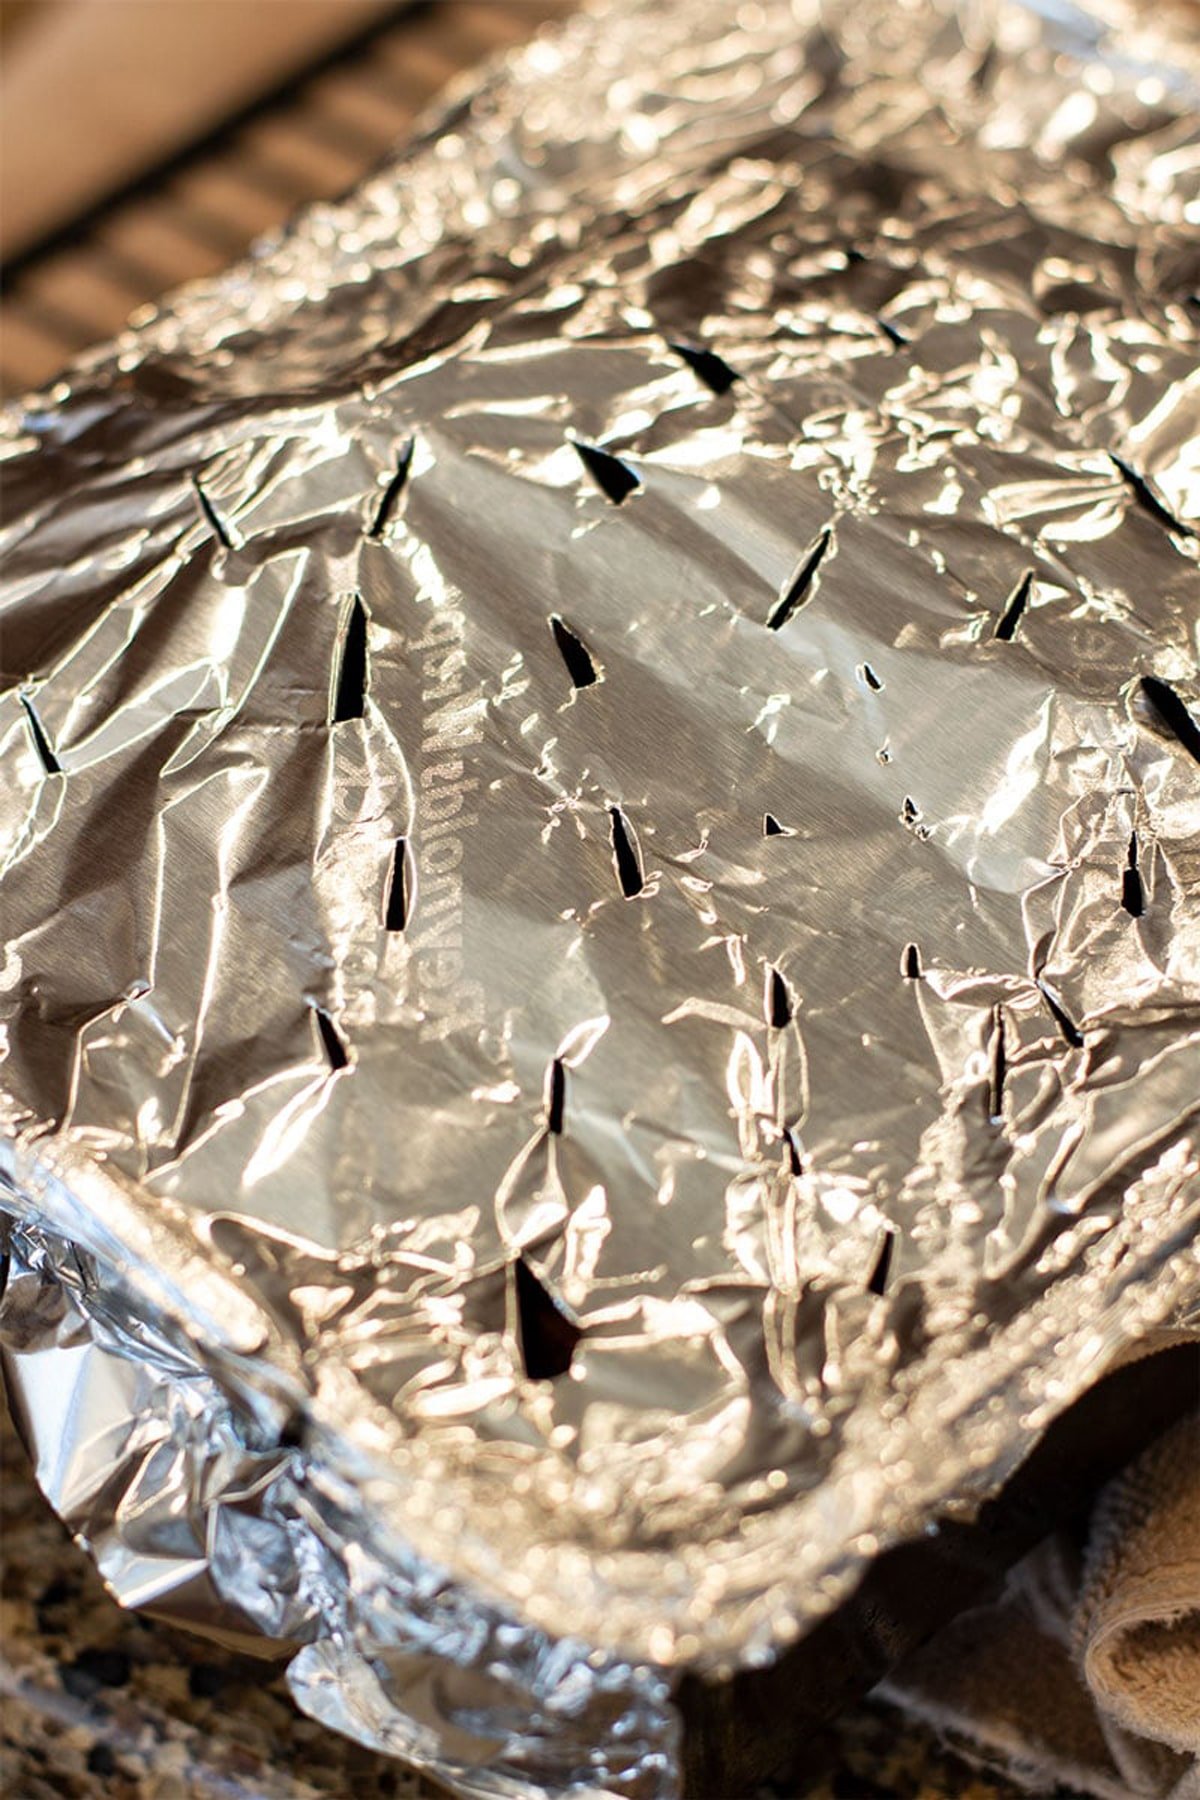 Foil packet with hole poked in aluminum foil.